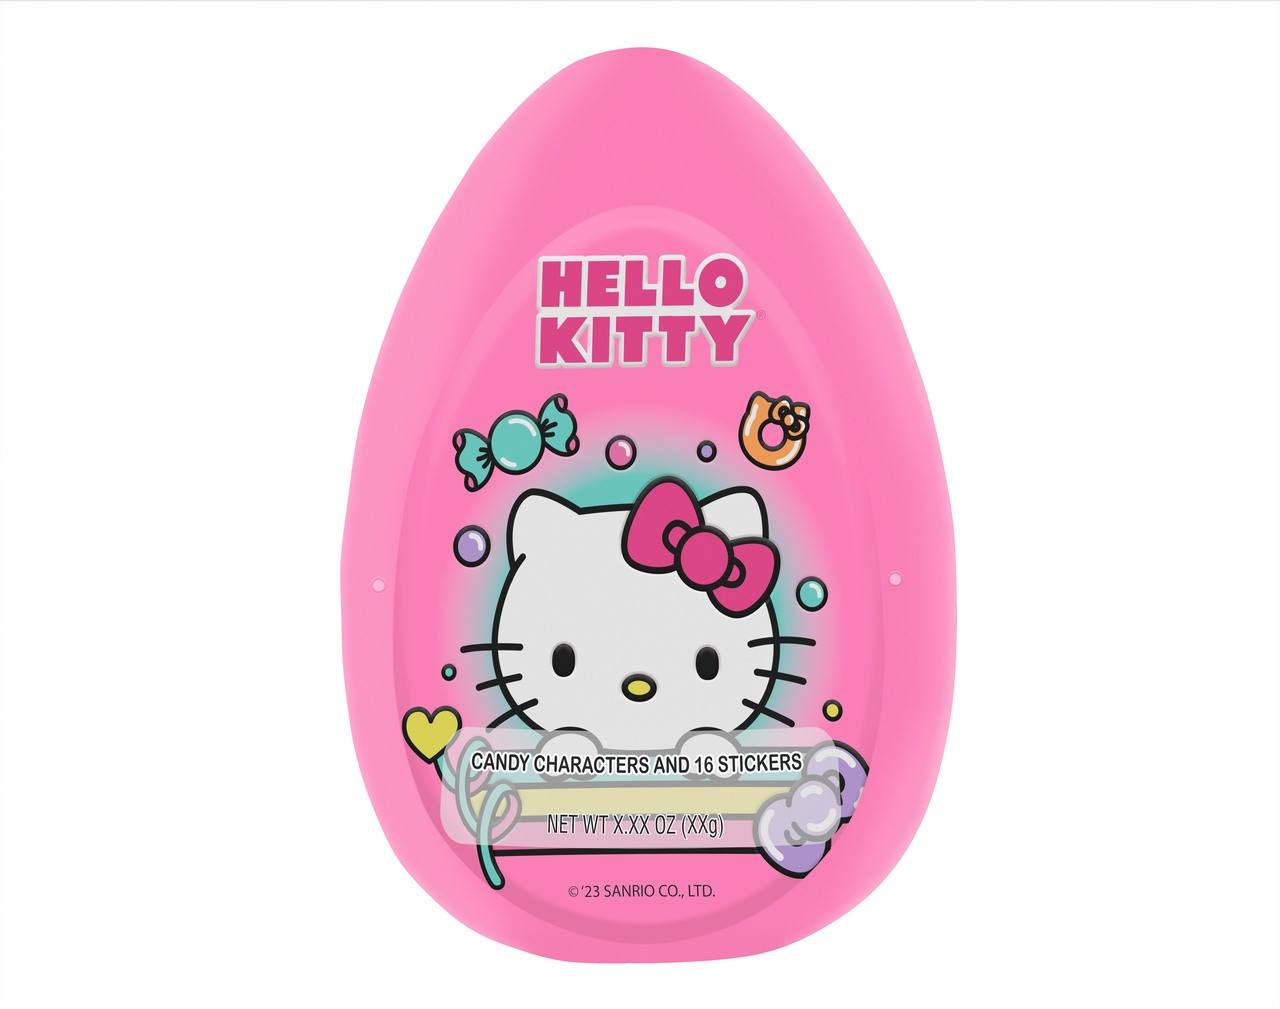 Hello Kitty Molded and Printed Jumbo Egg with Candy